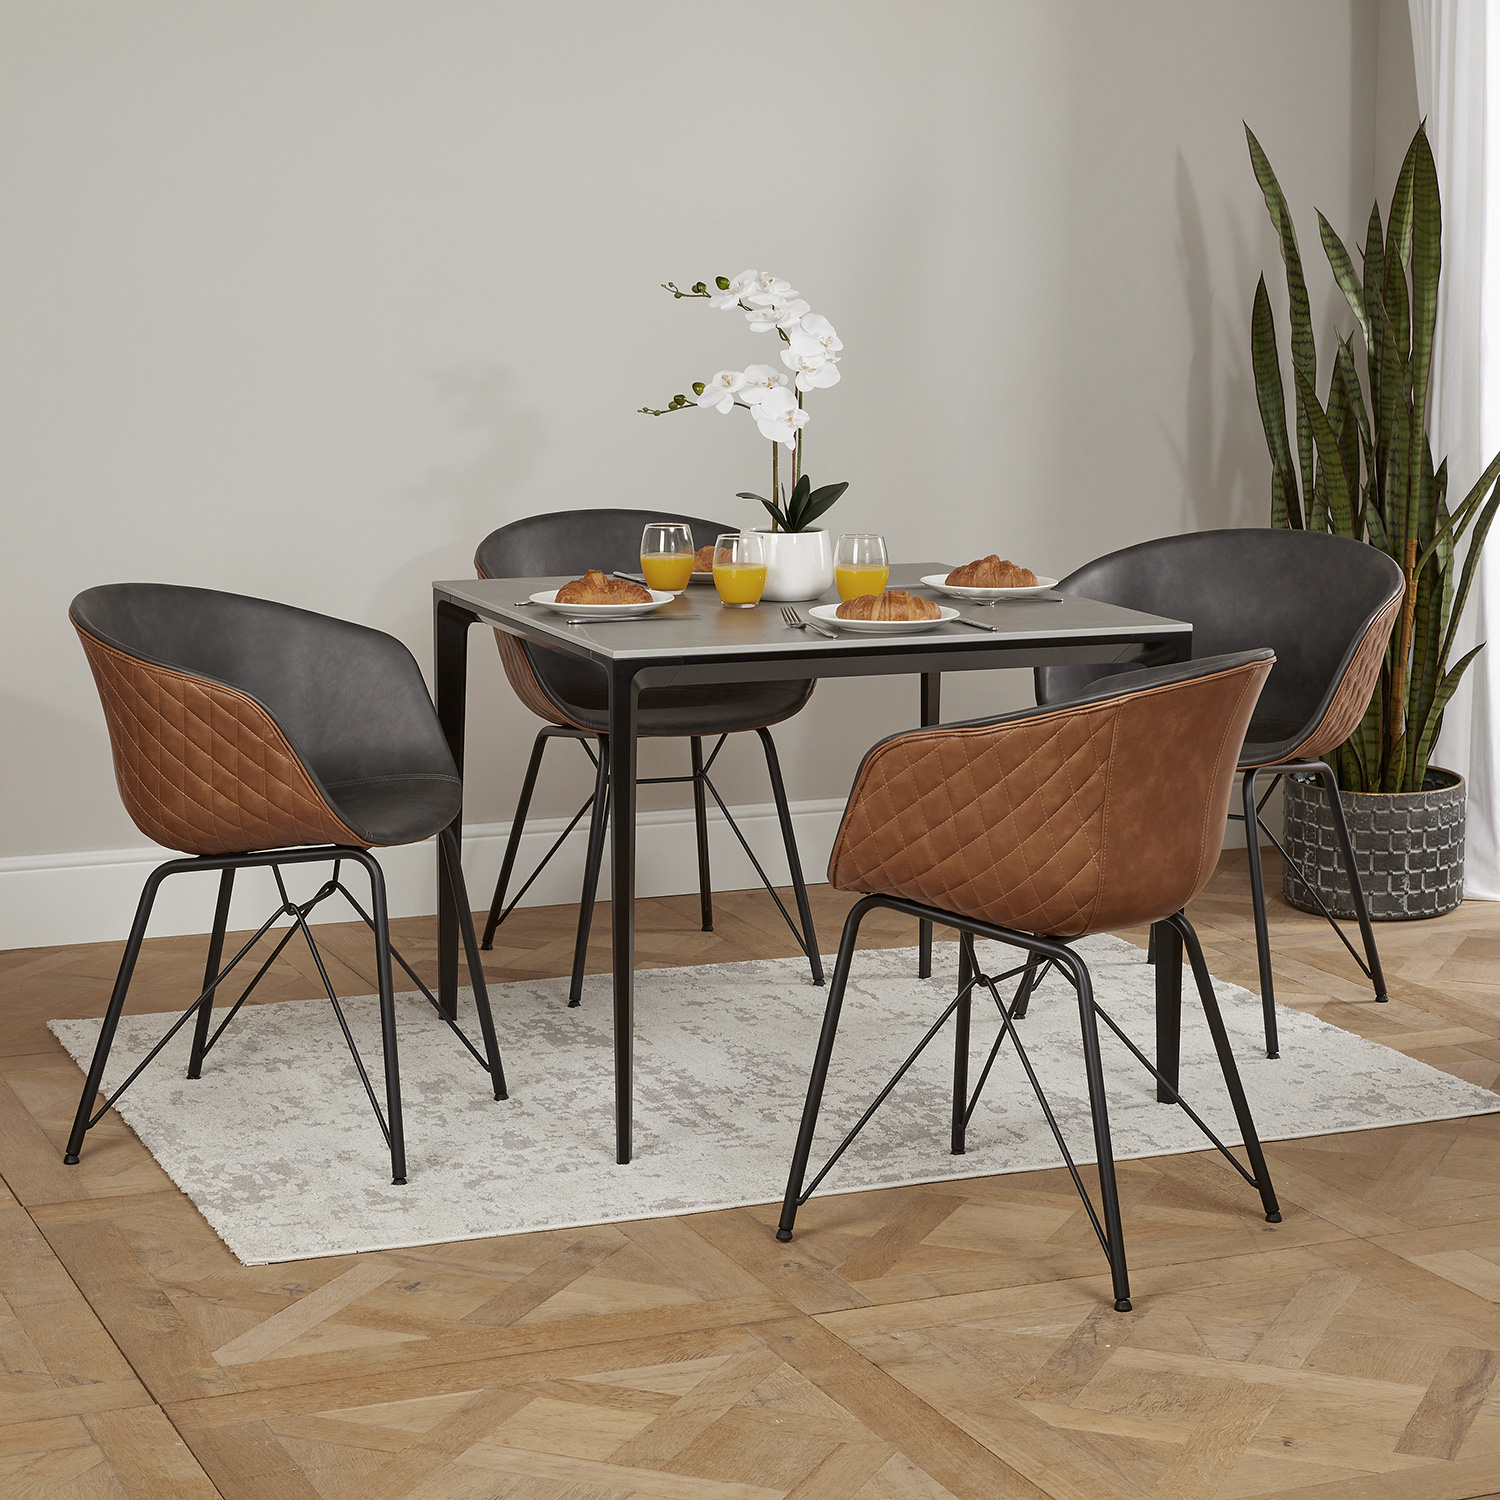 Bellagio 90cm Square Grey Sintered Stone Dining Table Set with 4 x Camila Grey/Tan Dining Chairs